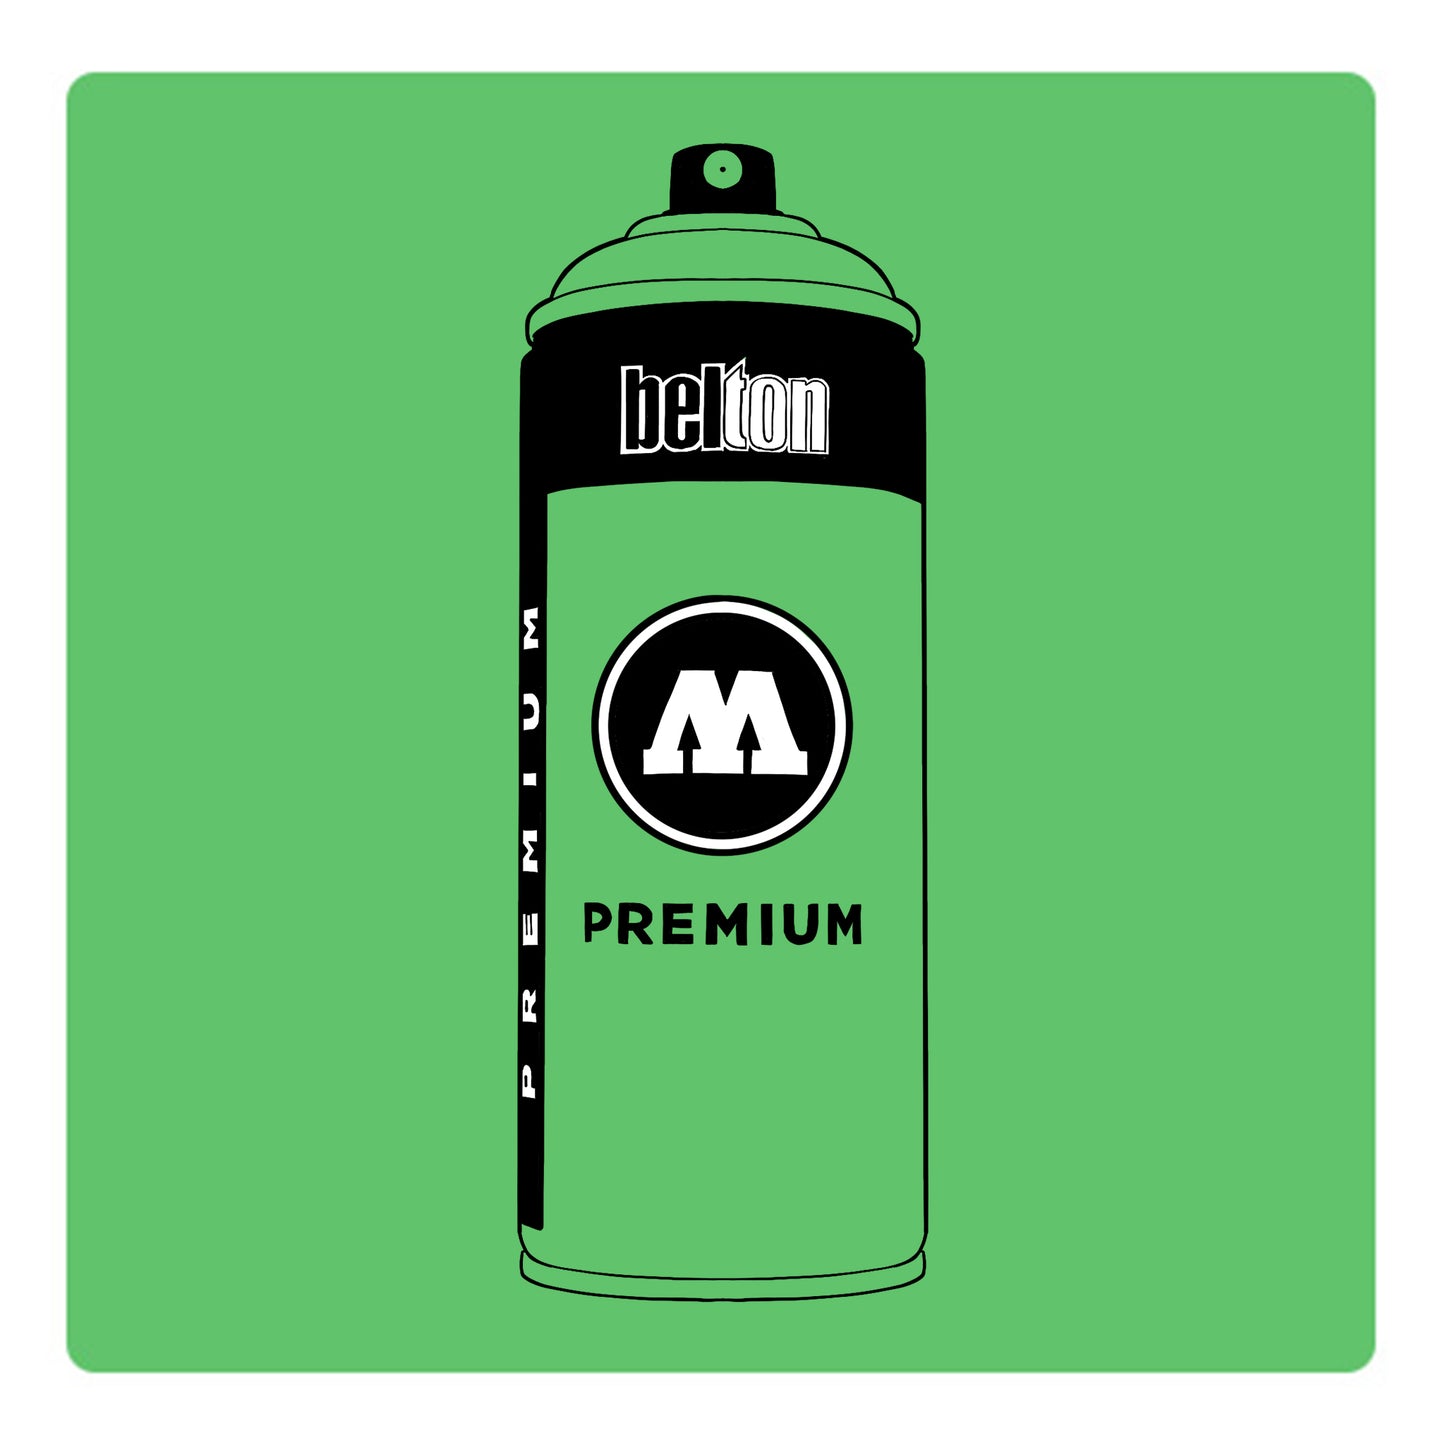 A black outline drawing of a pastel green spray paint can with the words "belton","premium" and the letter"M" written on the face in black and white font. The background is a color swatch of the same pastel green with a white border